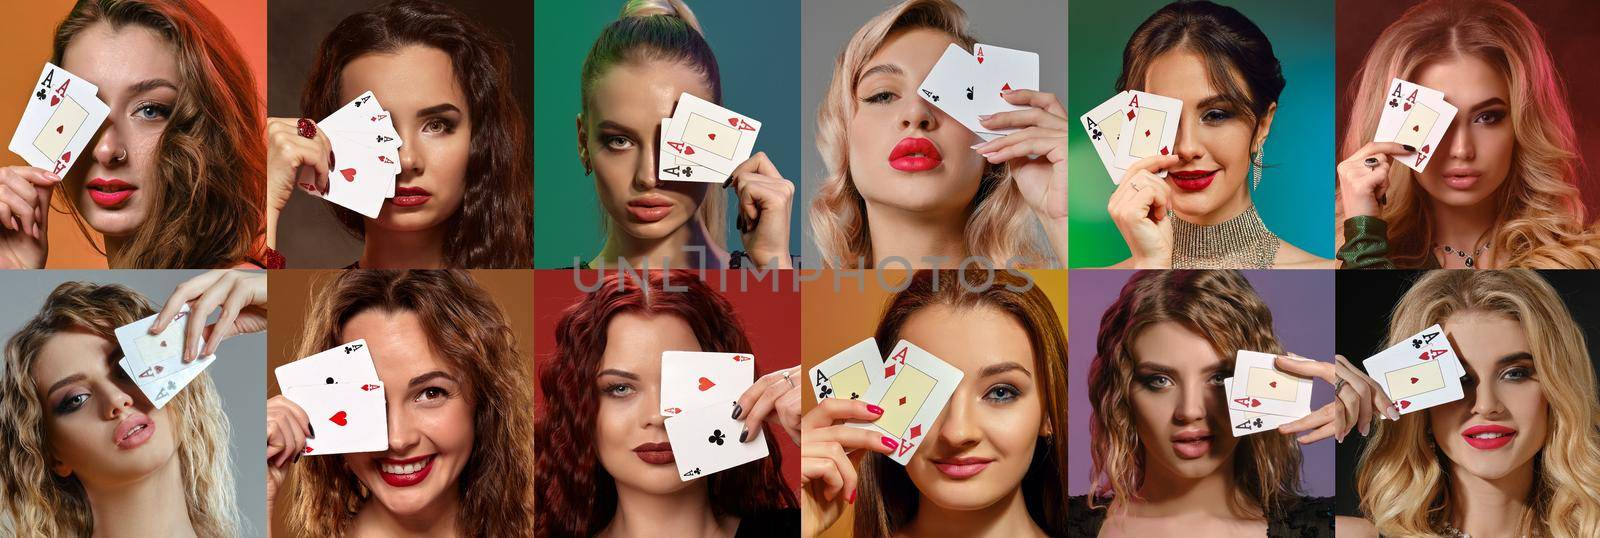 Collage of models with stylish hairstyles, in jewelry. They covered one eye by playing cards, posing on colorful backgrounds. Poker, casino. Close-up by nazarovsergey